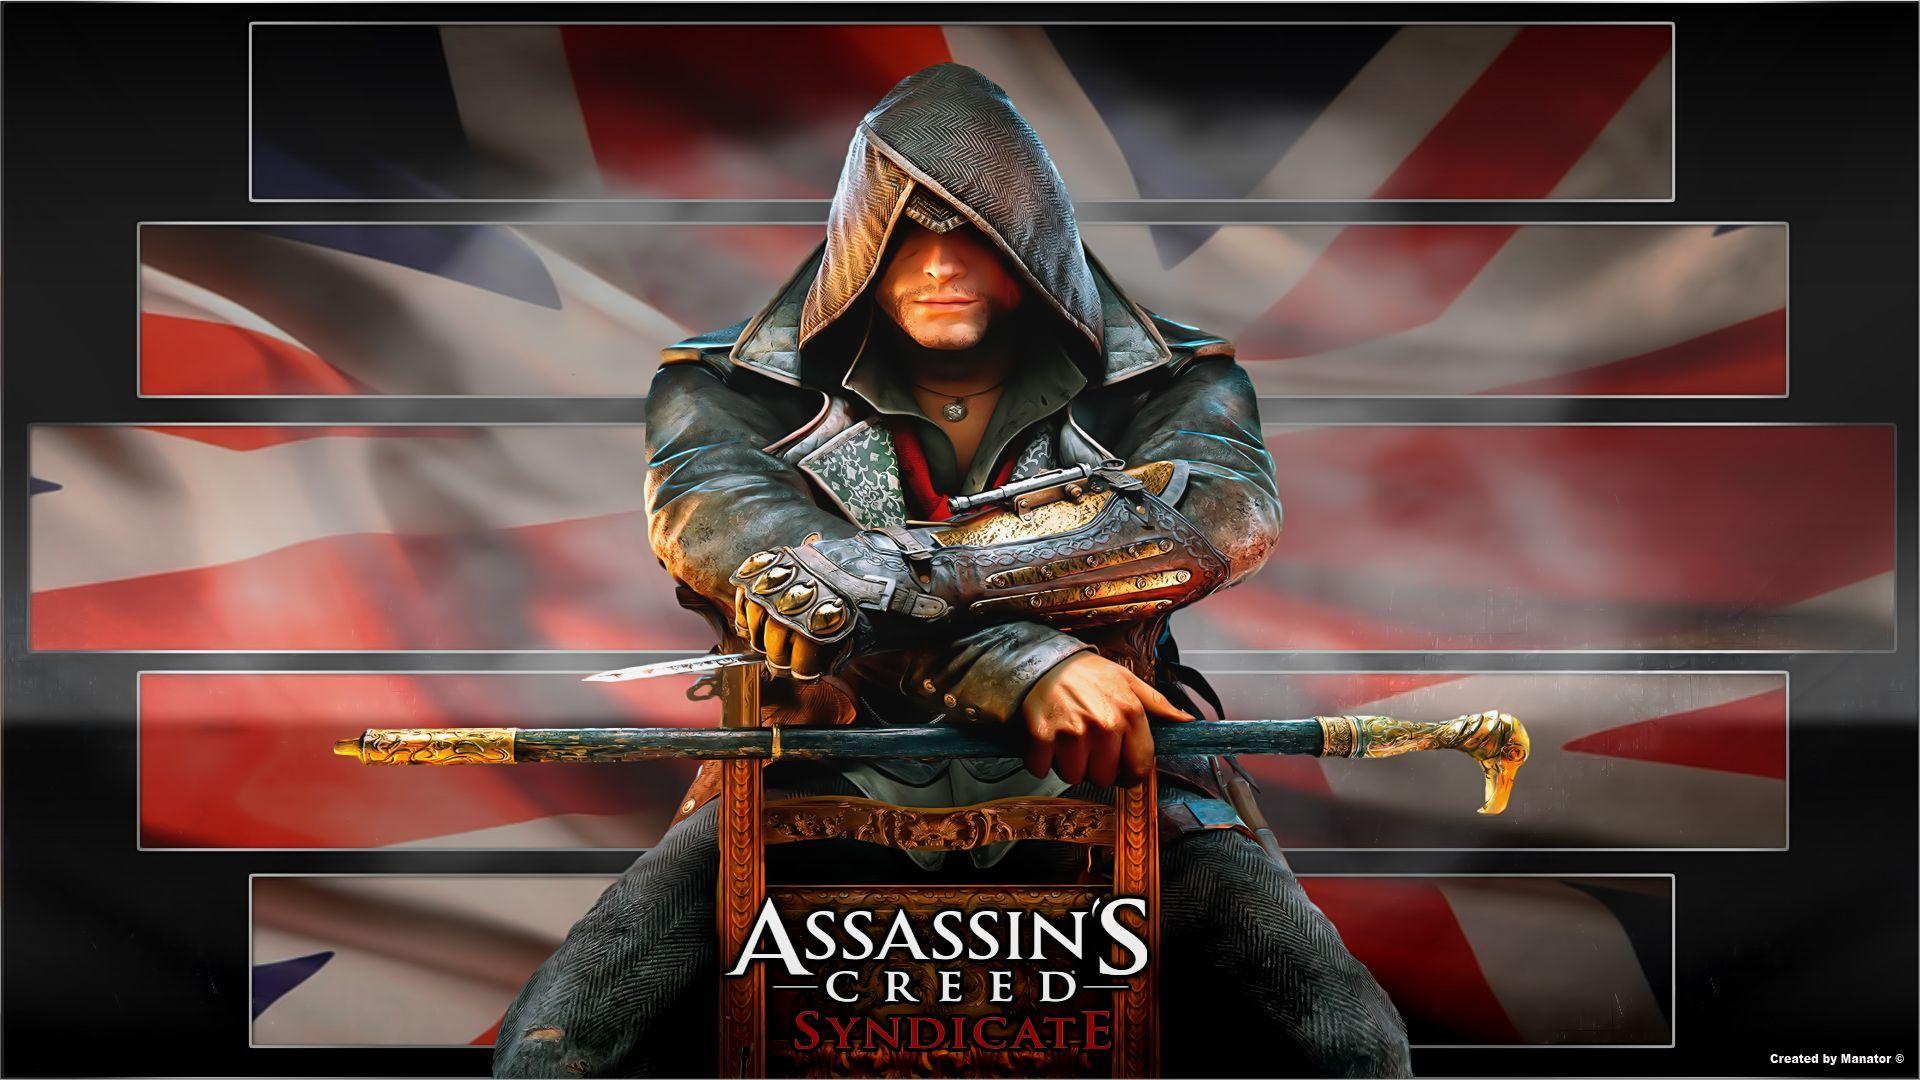 Assassin's Creed Syndicate Jacob Frye. Assassin's Creed World